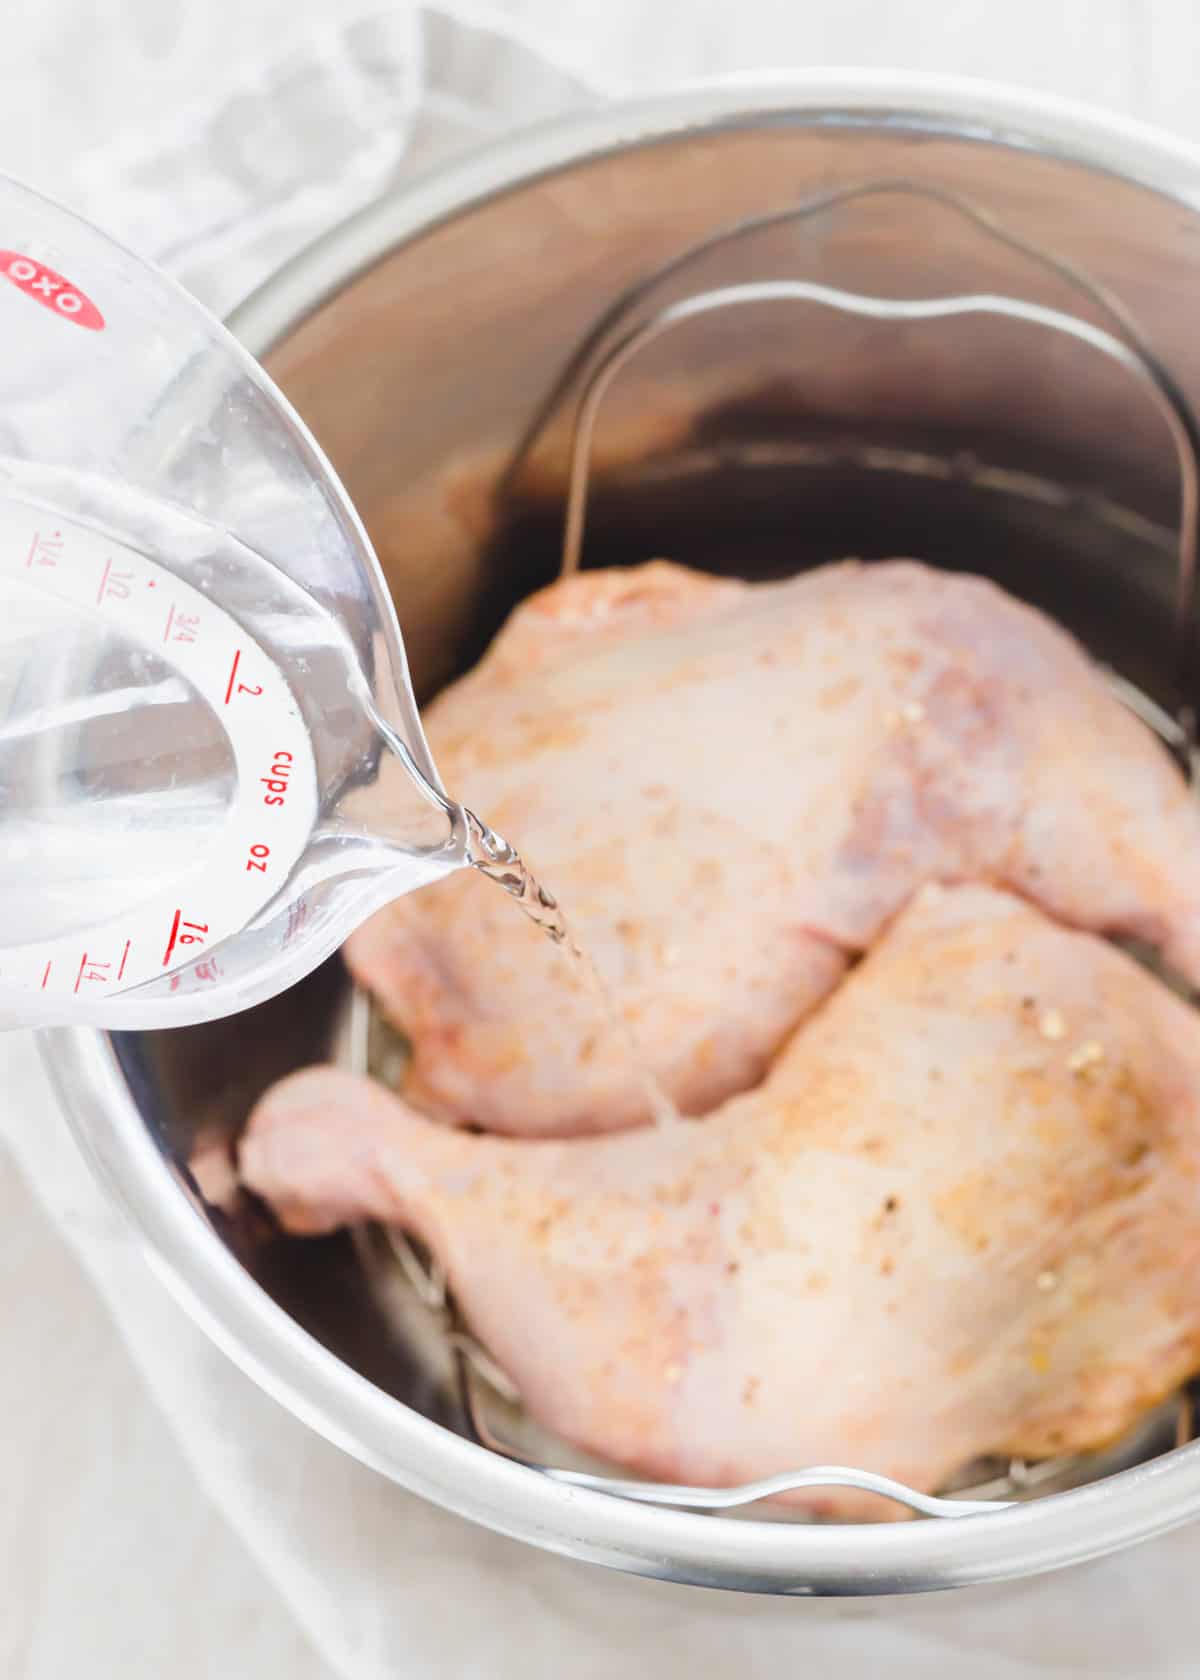 Pouring water into the Instant Pot with seasoned chicken leg quarters on the trivet.